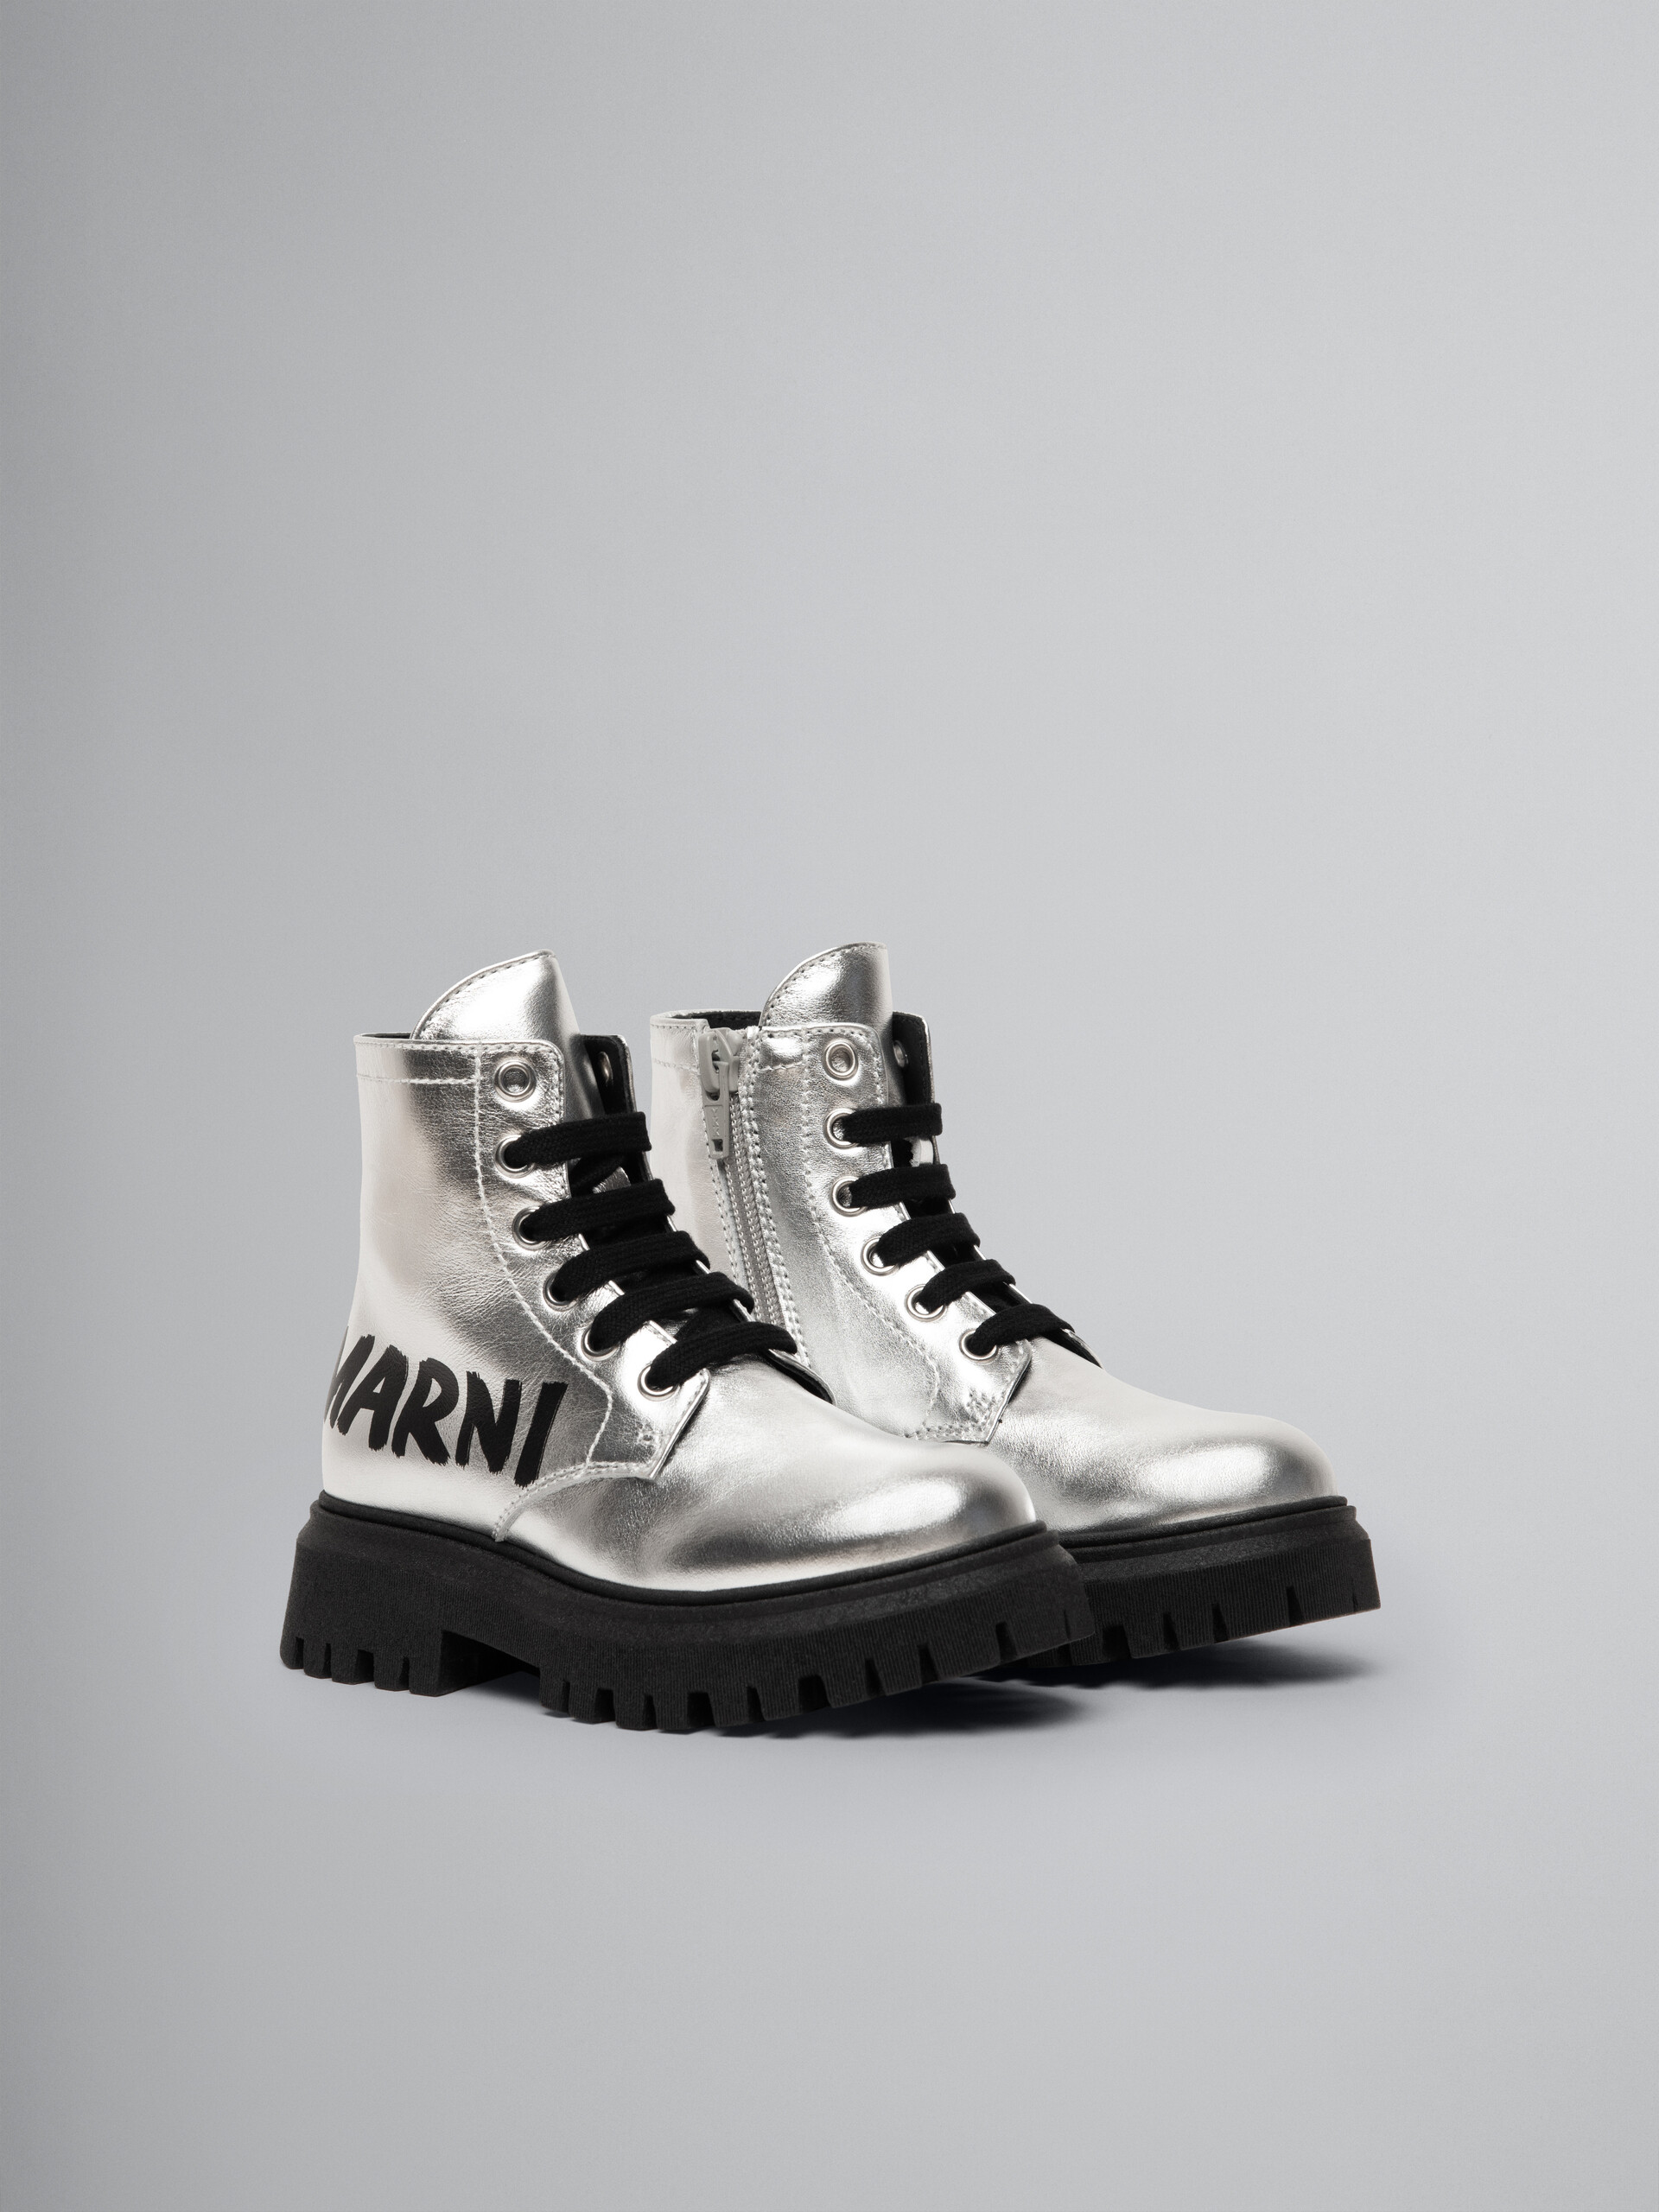 Silver leather combat boot with Brush logo - Other accessories - Image 2